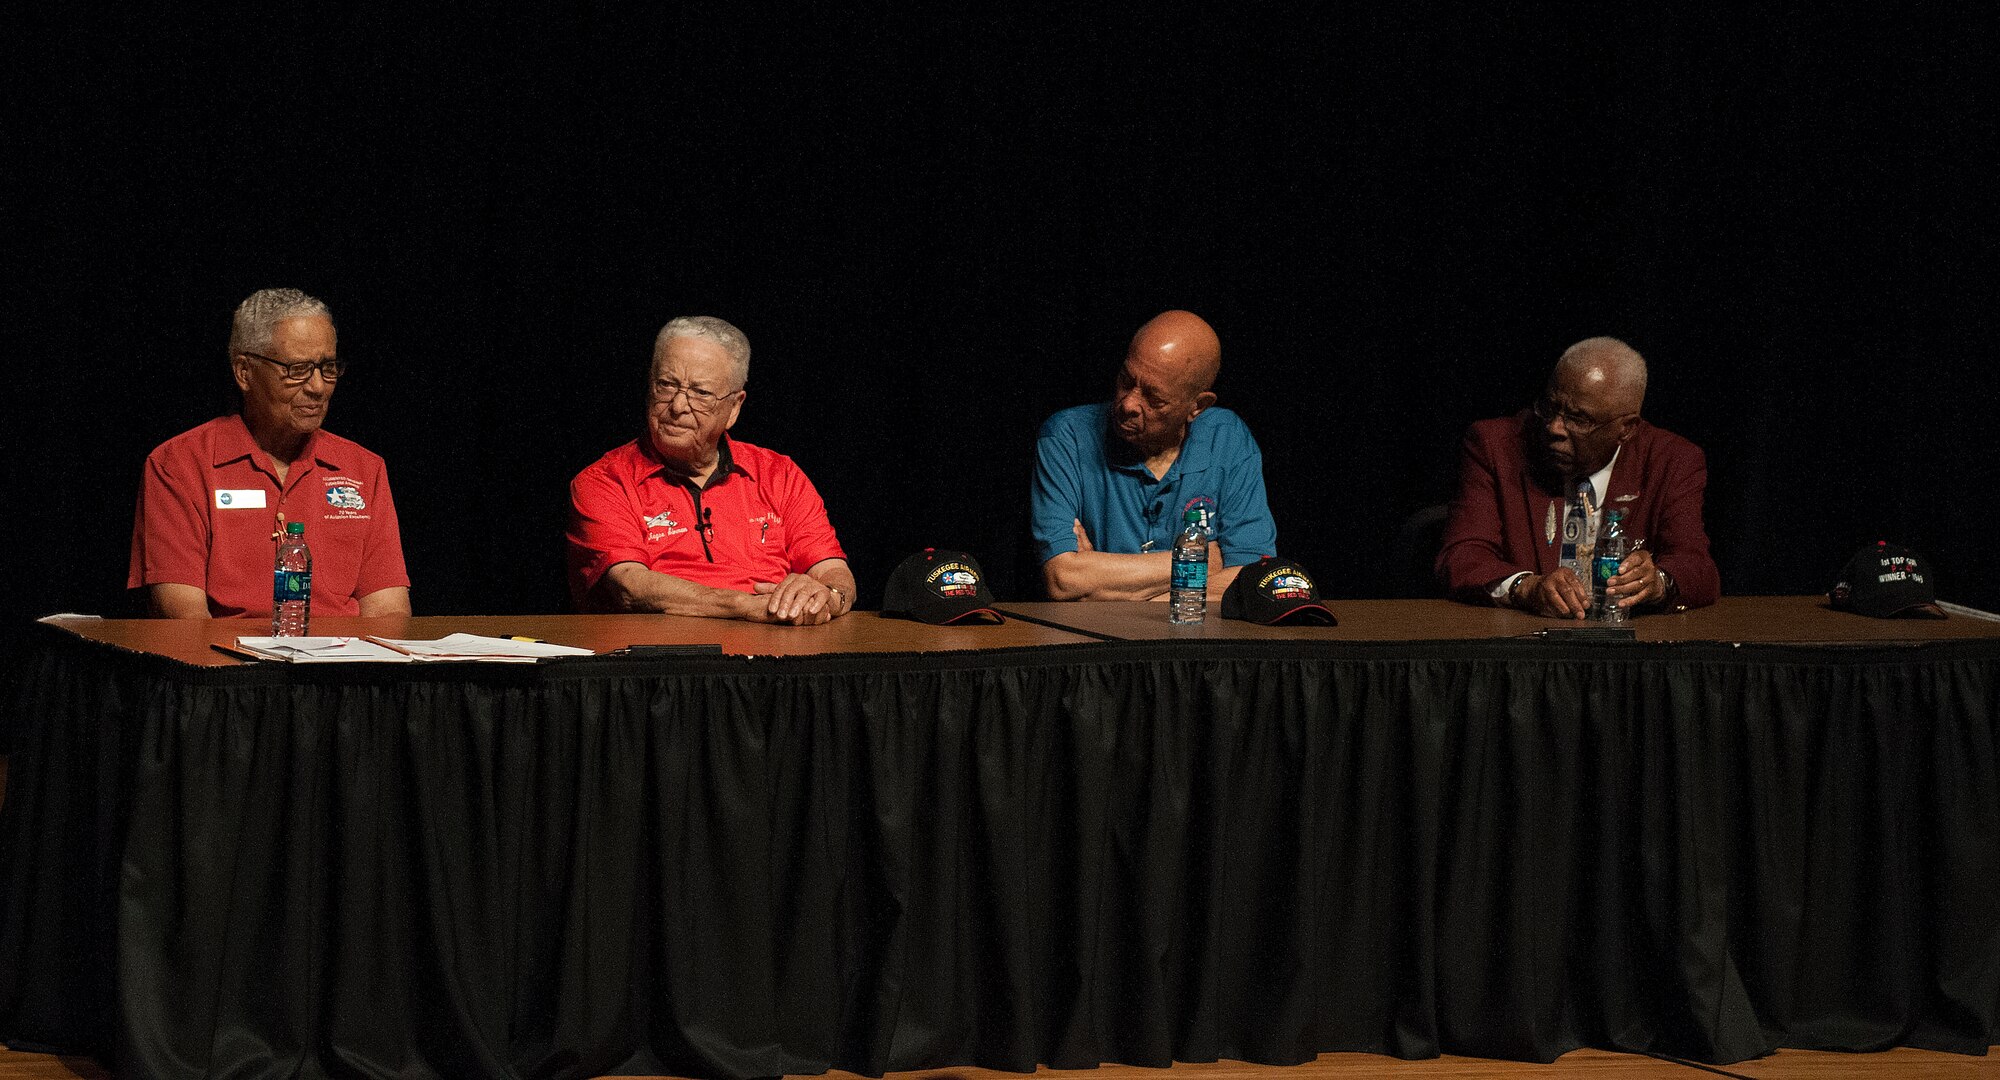 From left to right, retired Col. Charles McGee and Lt. Cols. George Hardy, Harry Stewart and James Harvey III, four of the original Tuskegee Airmen, respond to a question about their military career during a presentation at the Cheyenne Civic Center, Cheyenne, Wyo., August 14, 2015. Out of the 354 Tuskegee pilots who flew in combat missions during World War II, only 21 remain. (U.S. Air Force photo by Airman 1st Class Brandon Valle)